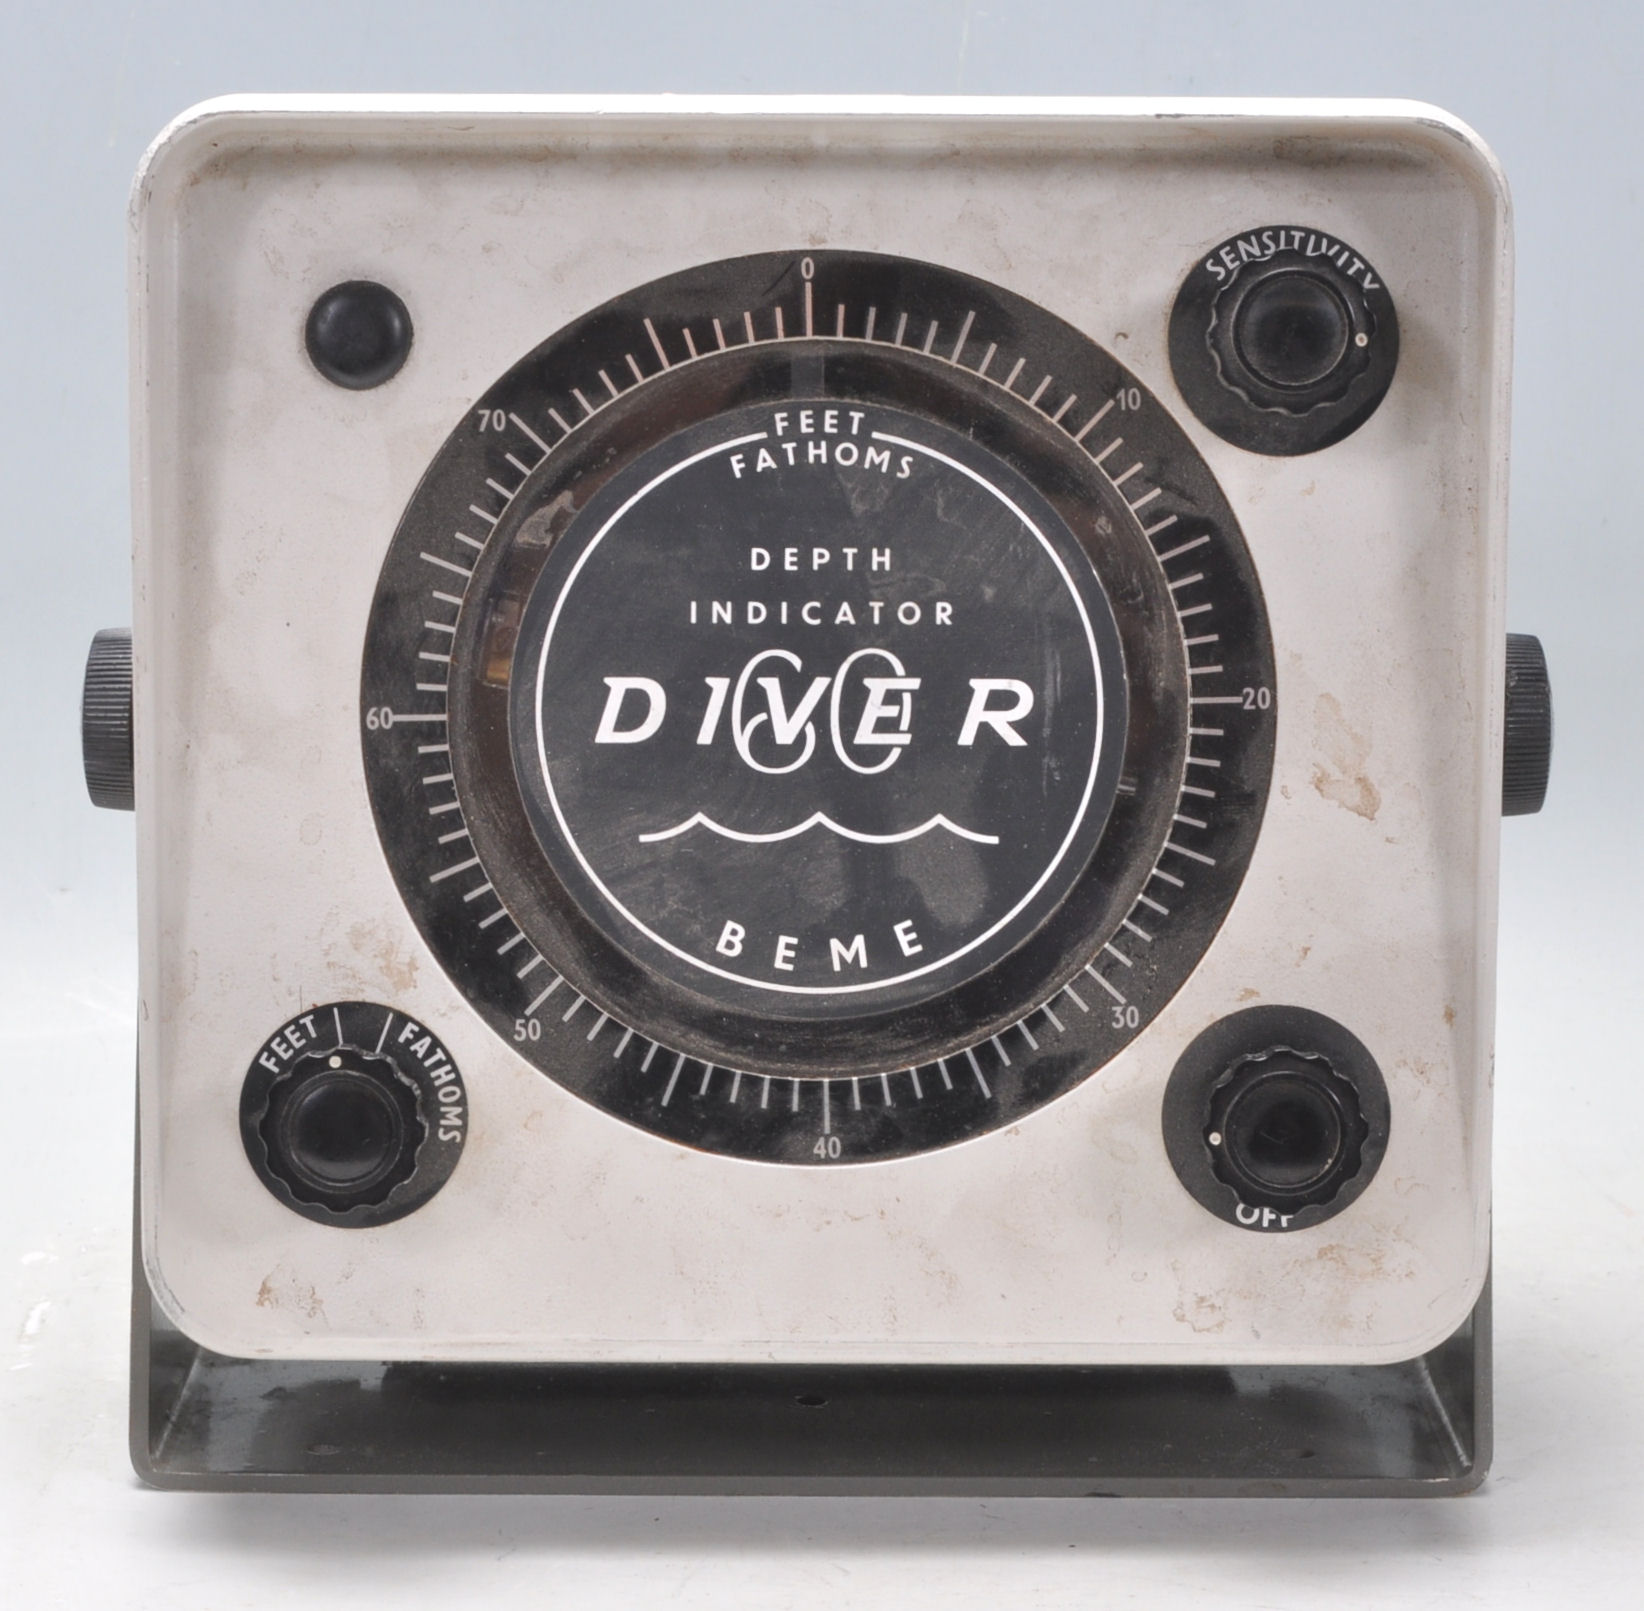 A vintage Divers Depth indicator machine by Beme being grey plastic cased with dials to the